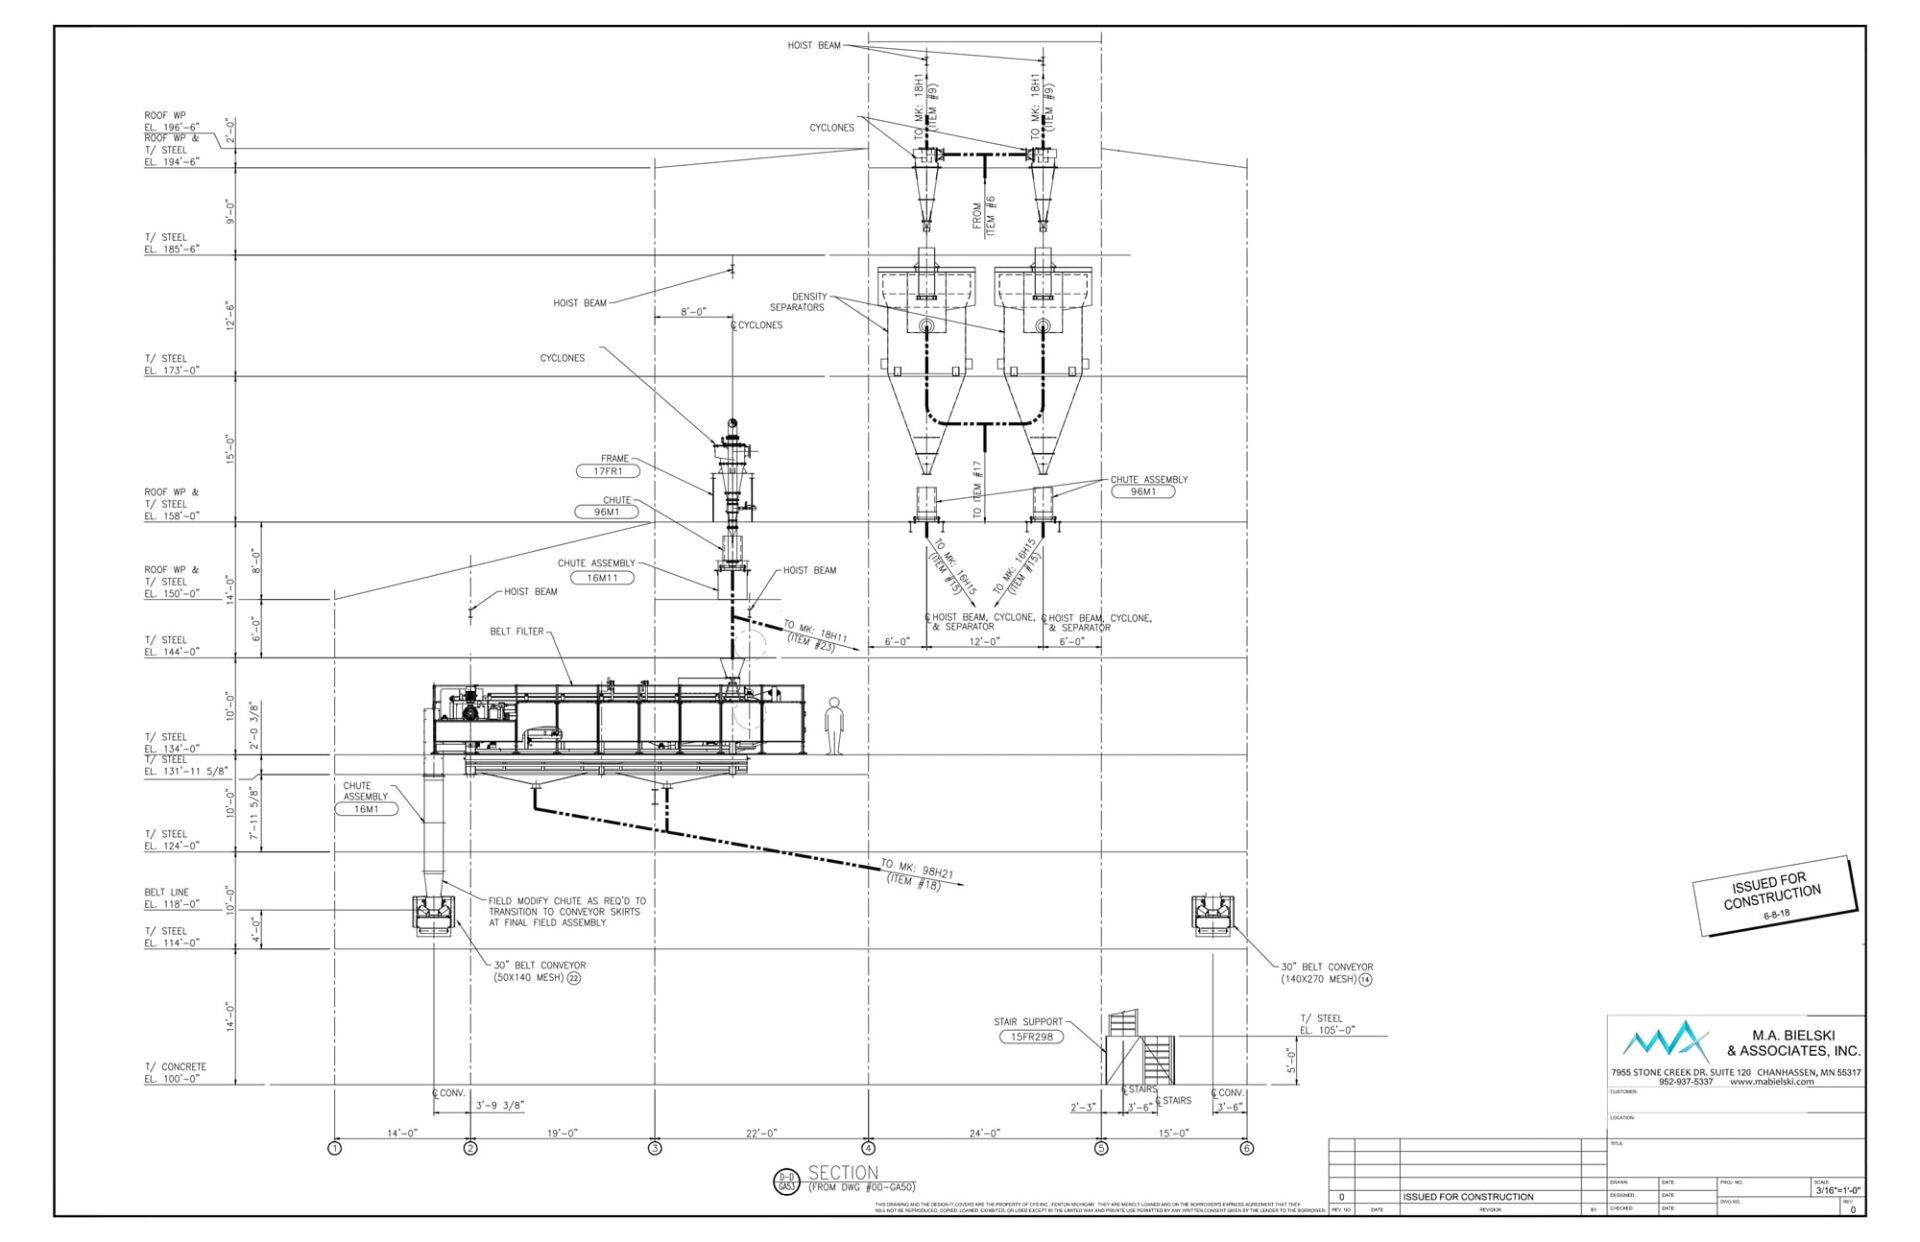 A section design drawing